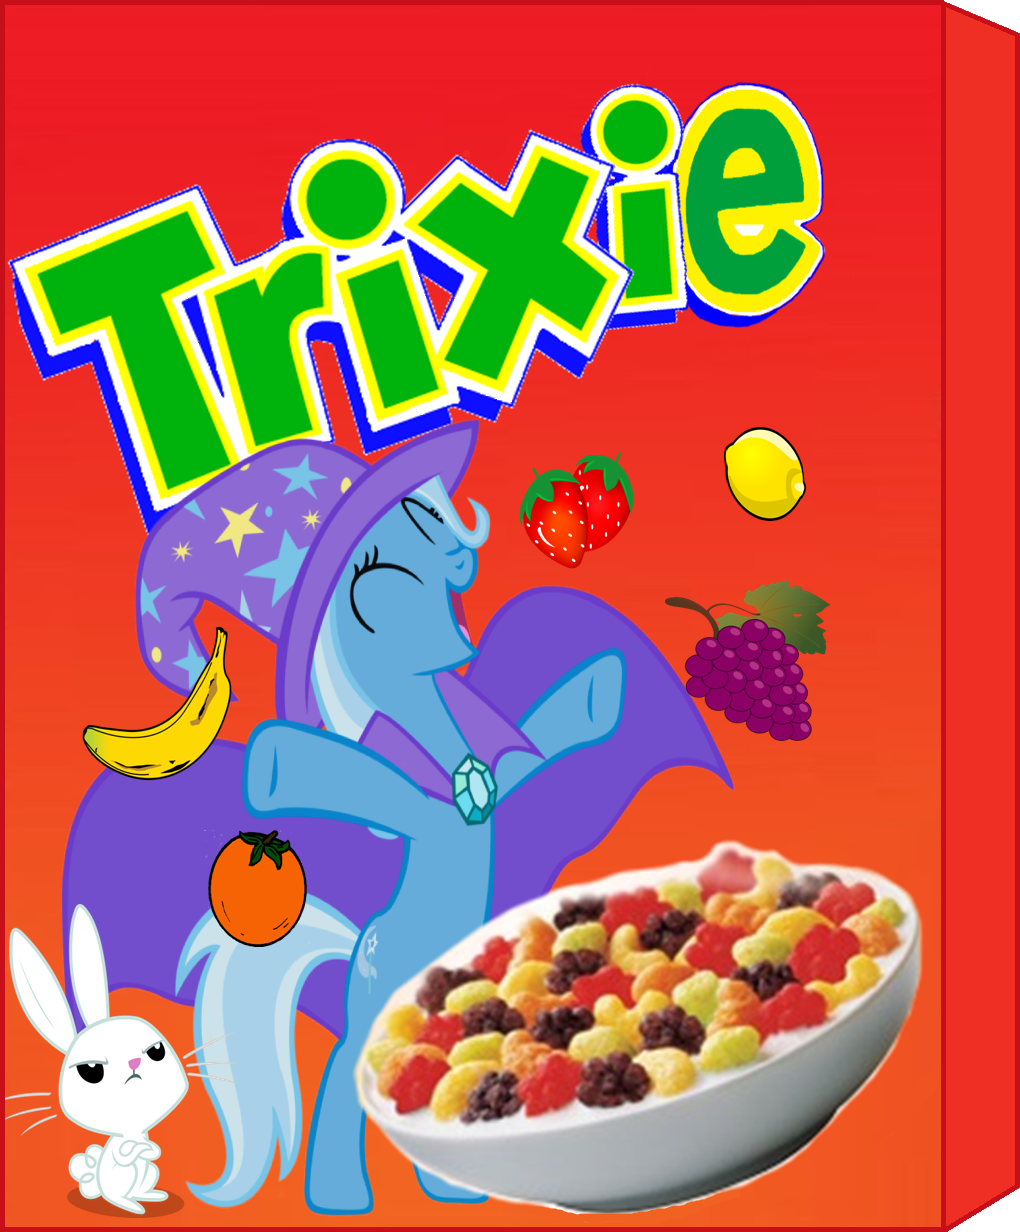 The Cereal of Trixie